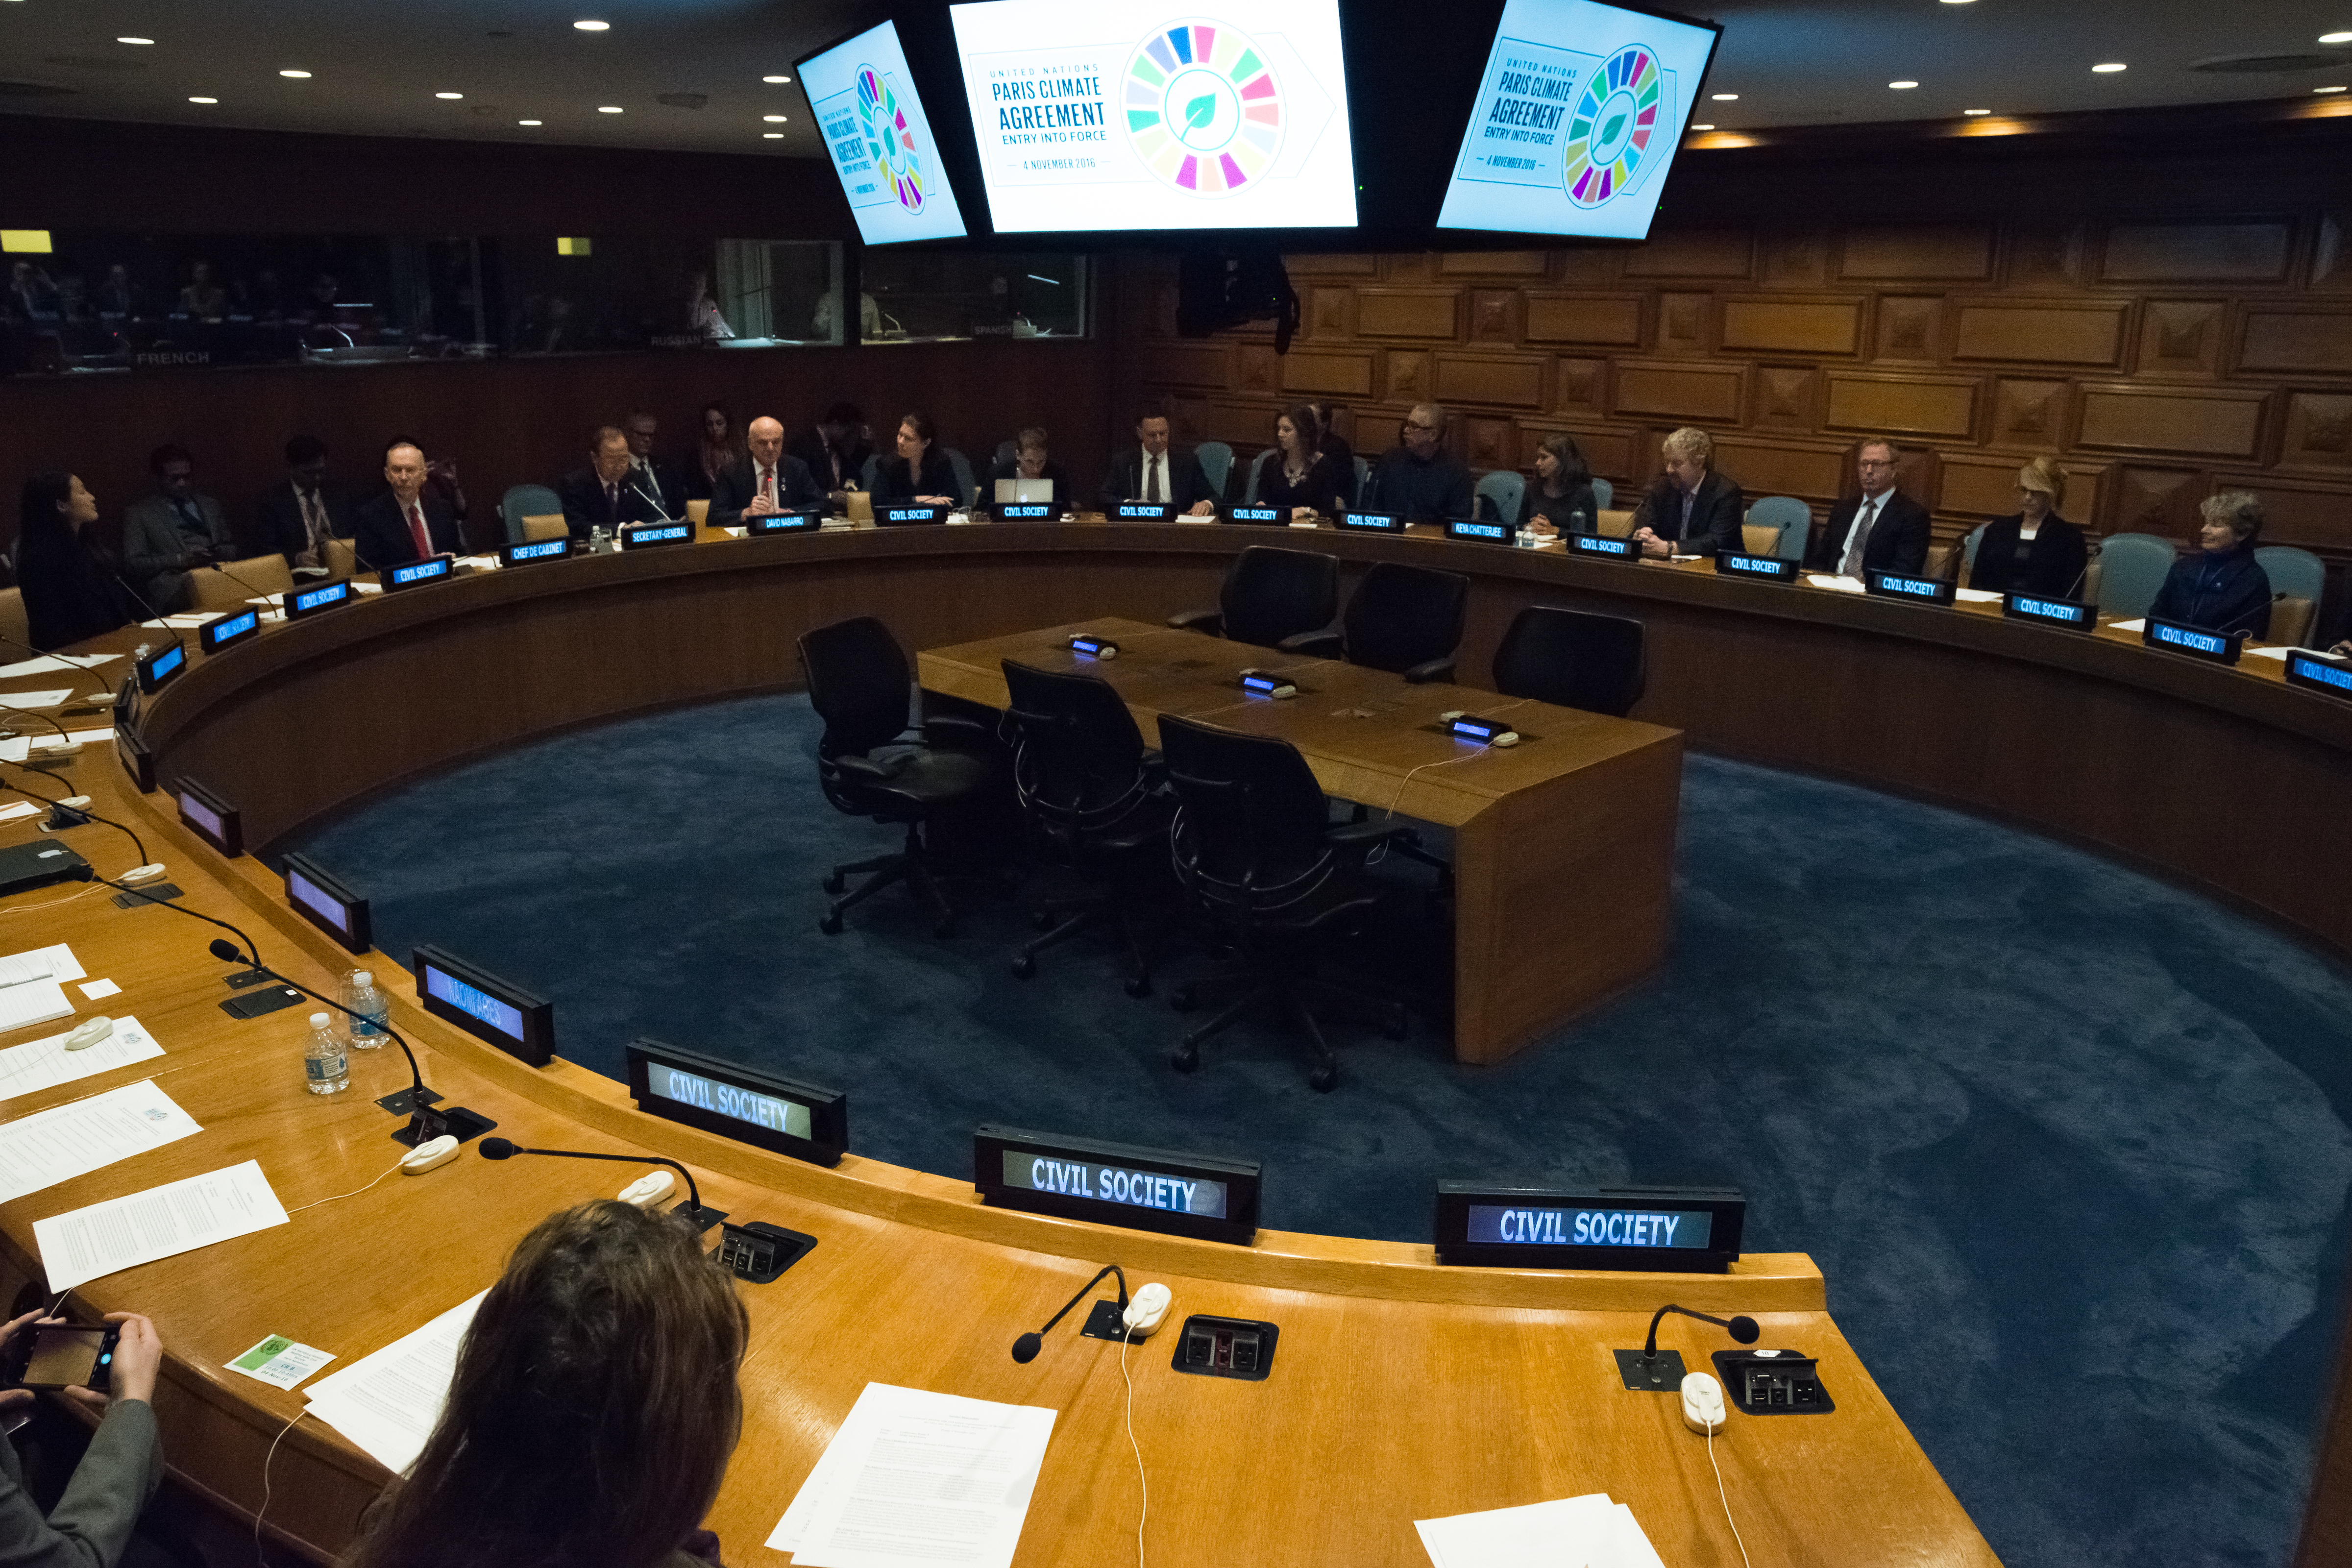 To mark the occasion of the Paris Climate Agreement's entry into force (November 4), United Nations Secretary-General Ban Ki-moon attended a meeting of civic society leaders in Conference Room 8 at UN Headquarters in New York City.